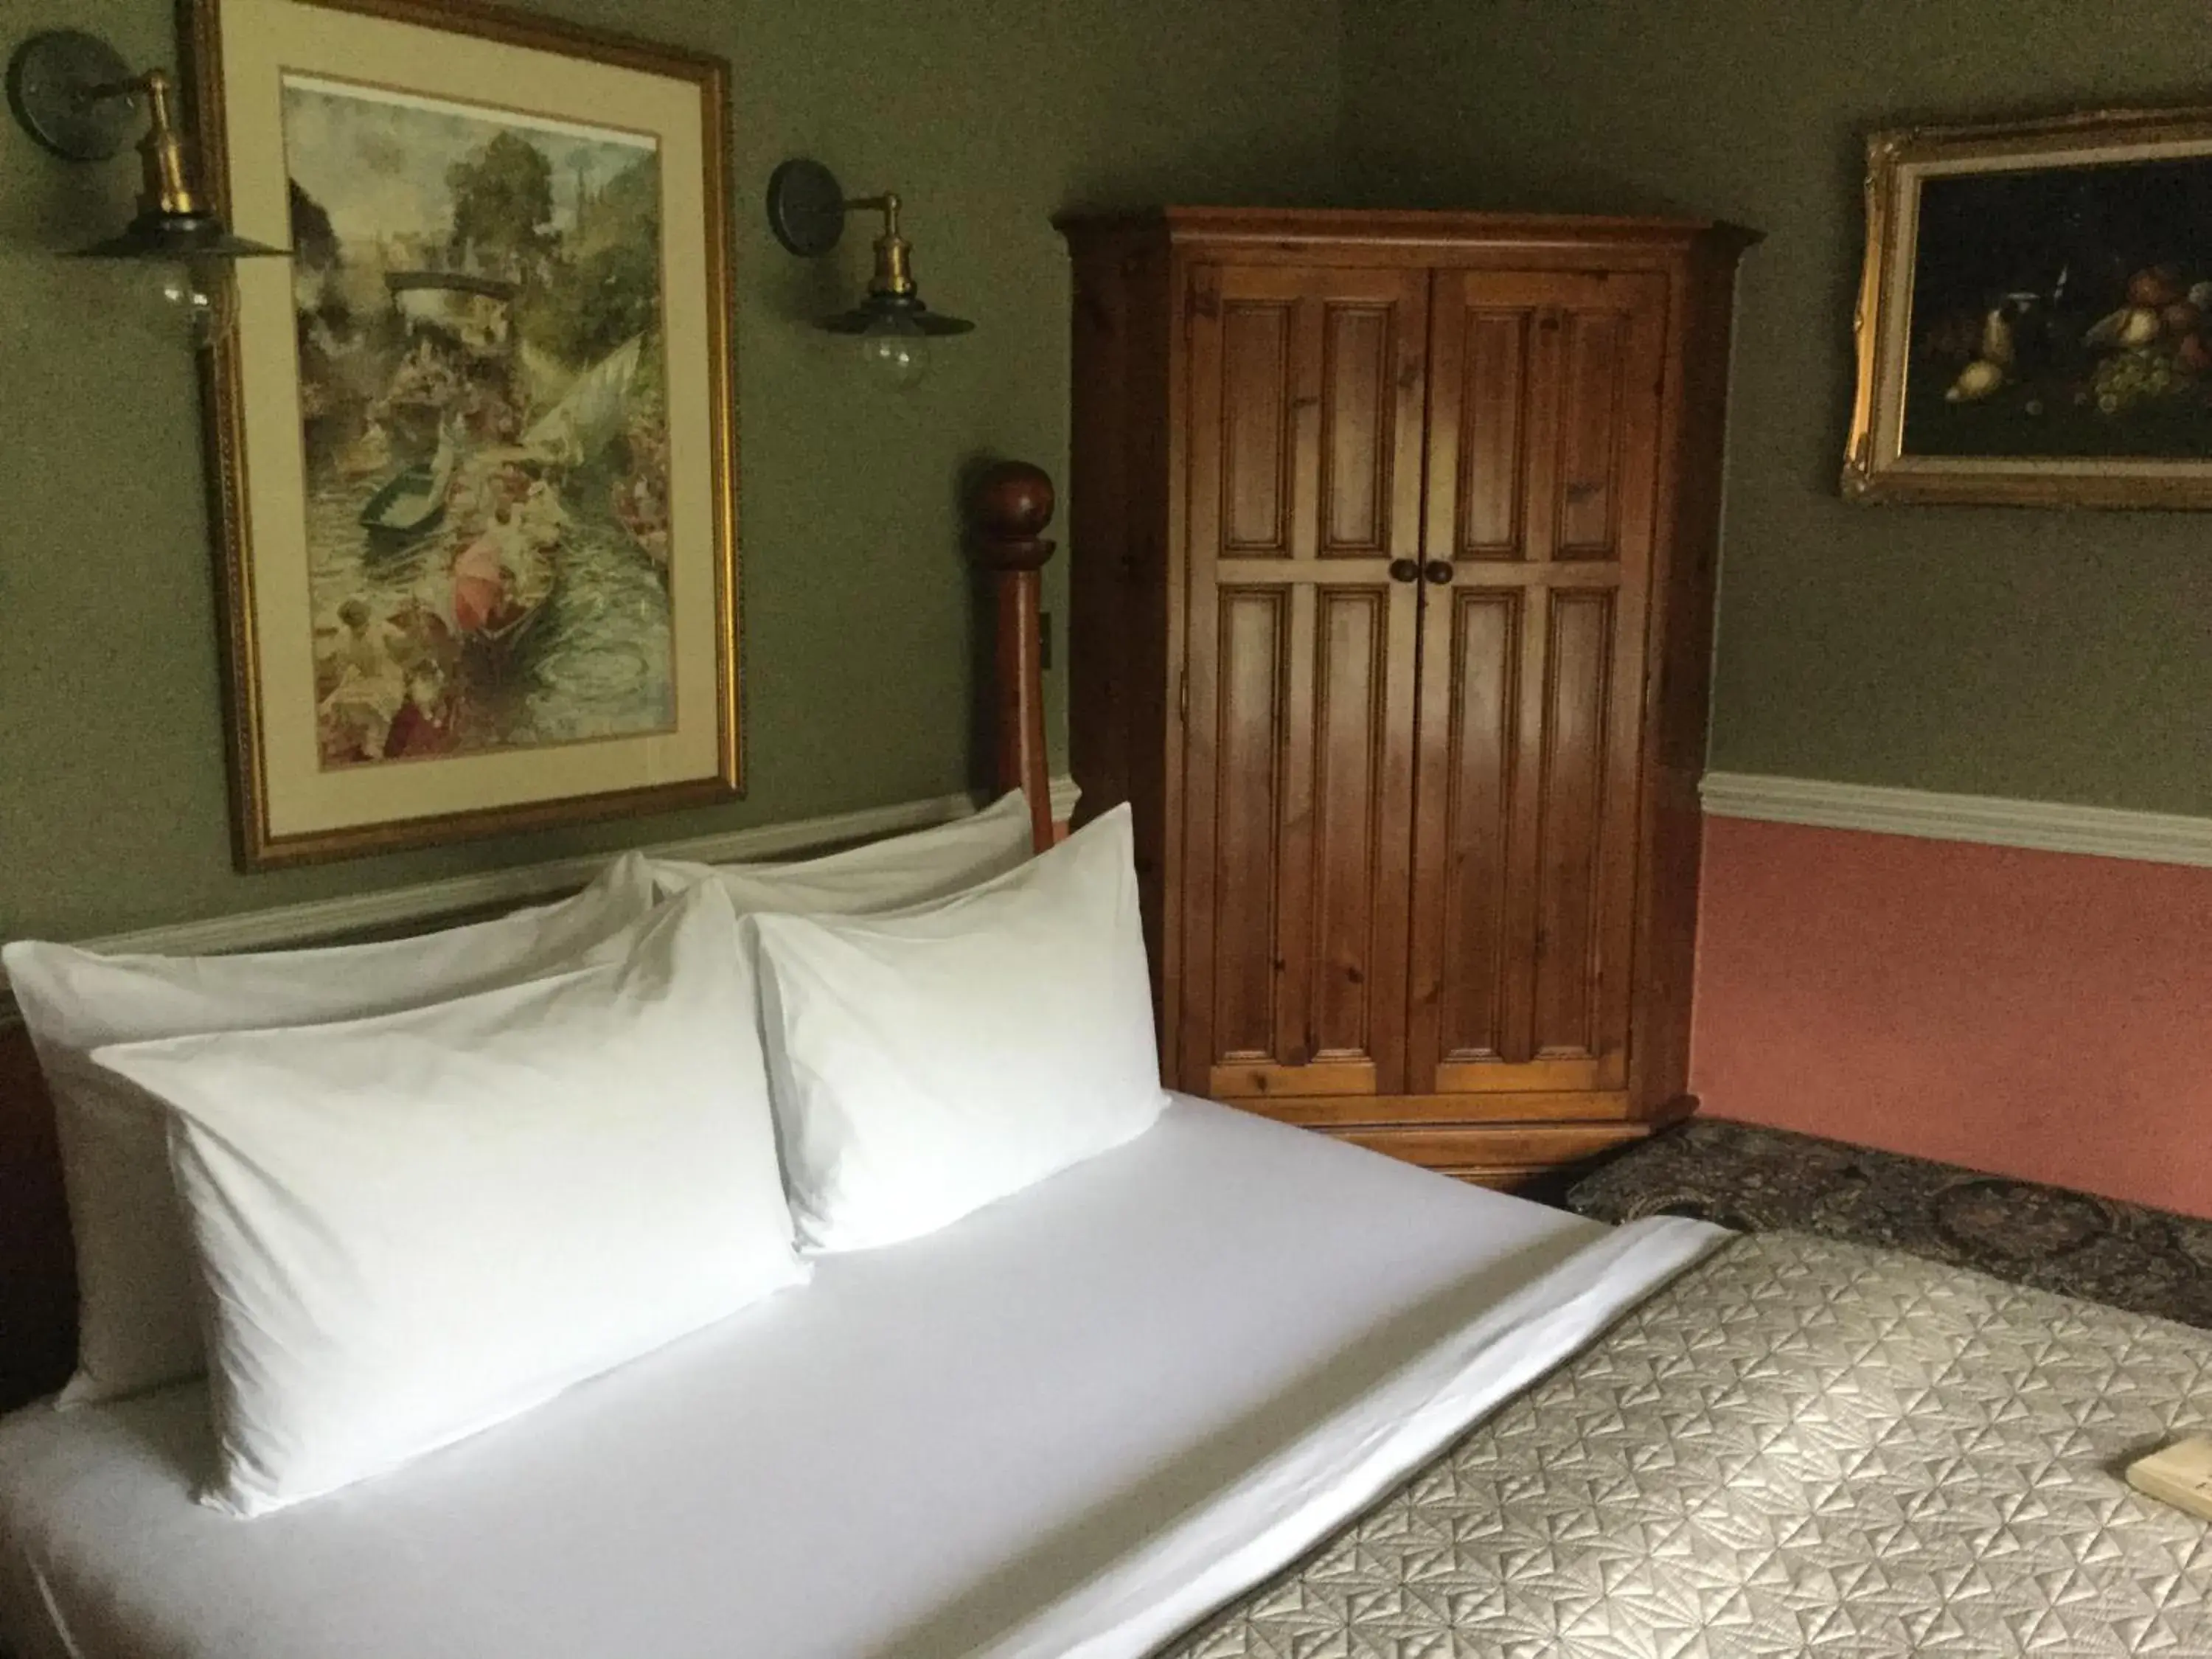 Bed, Room Photo in Ash Farm Country House